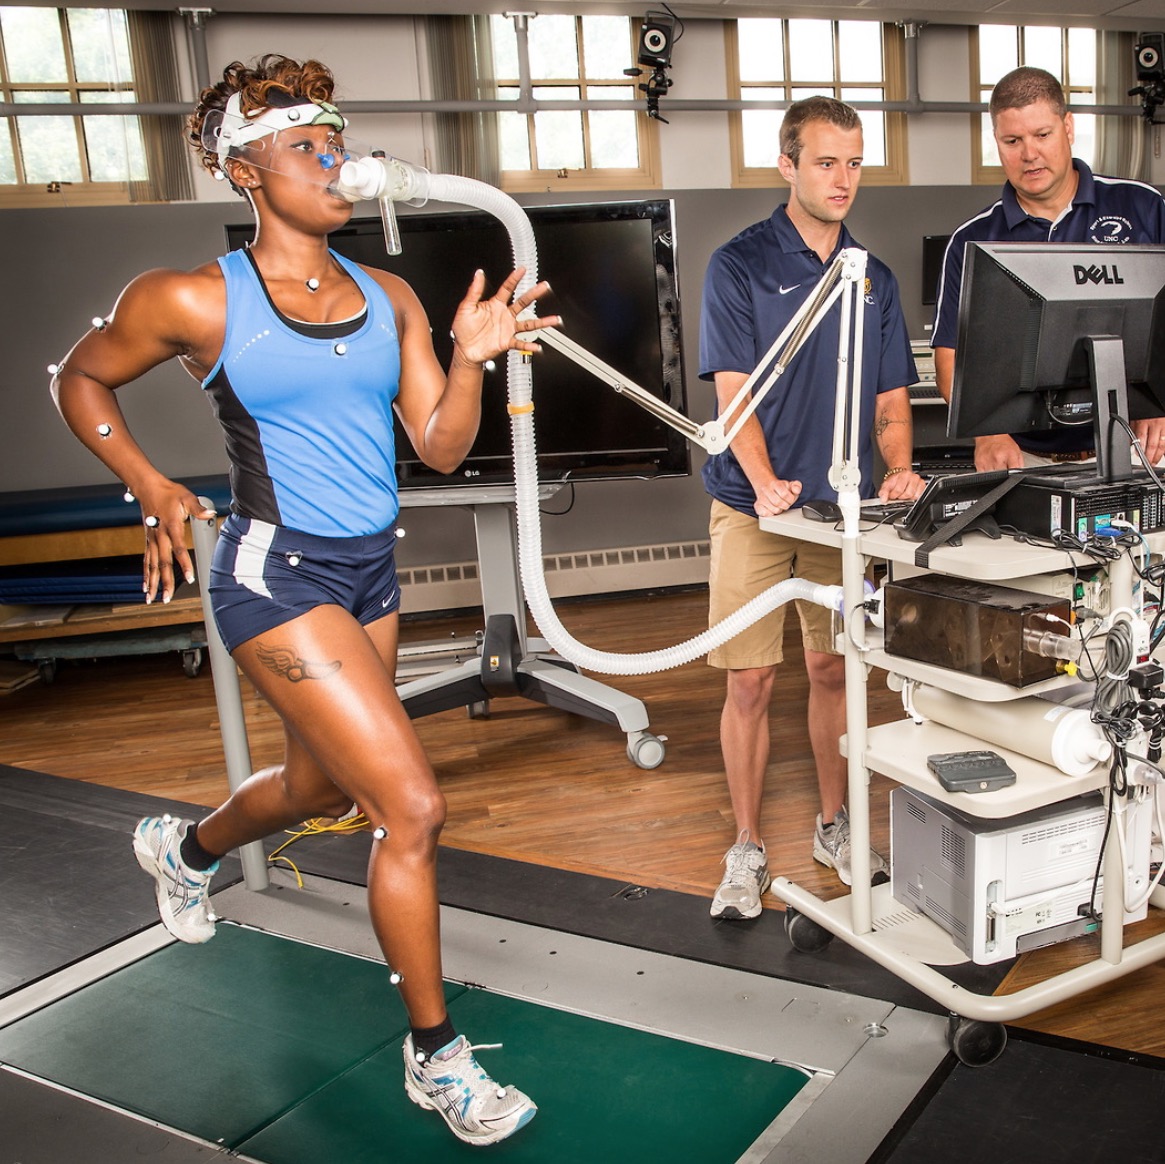 Graduate Research - Sport and Exercise Science